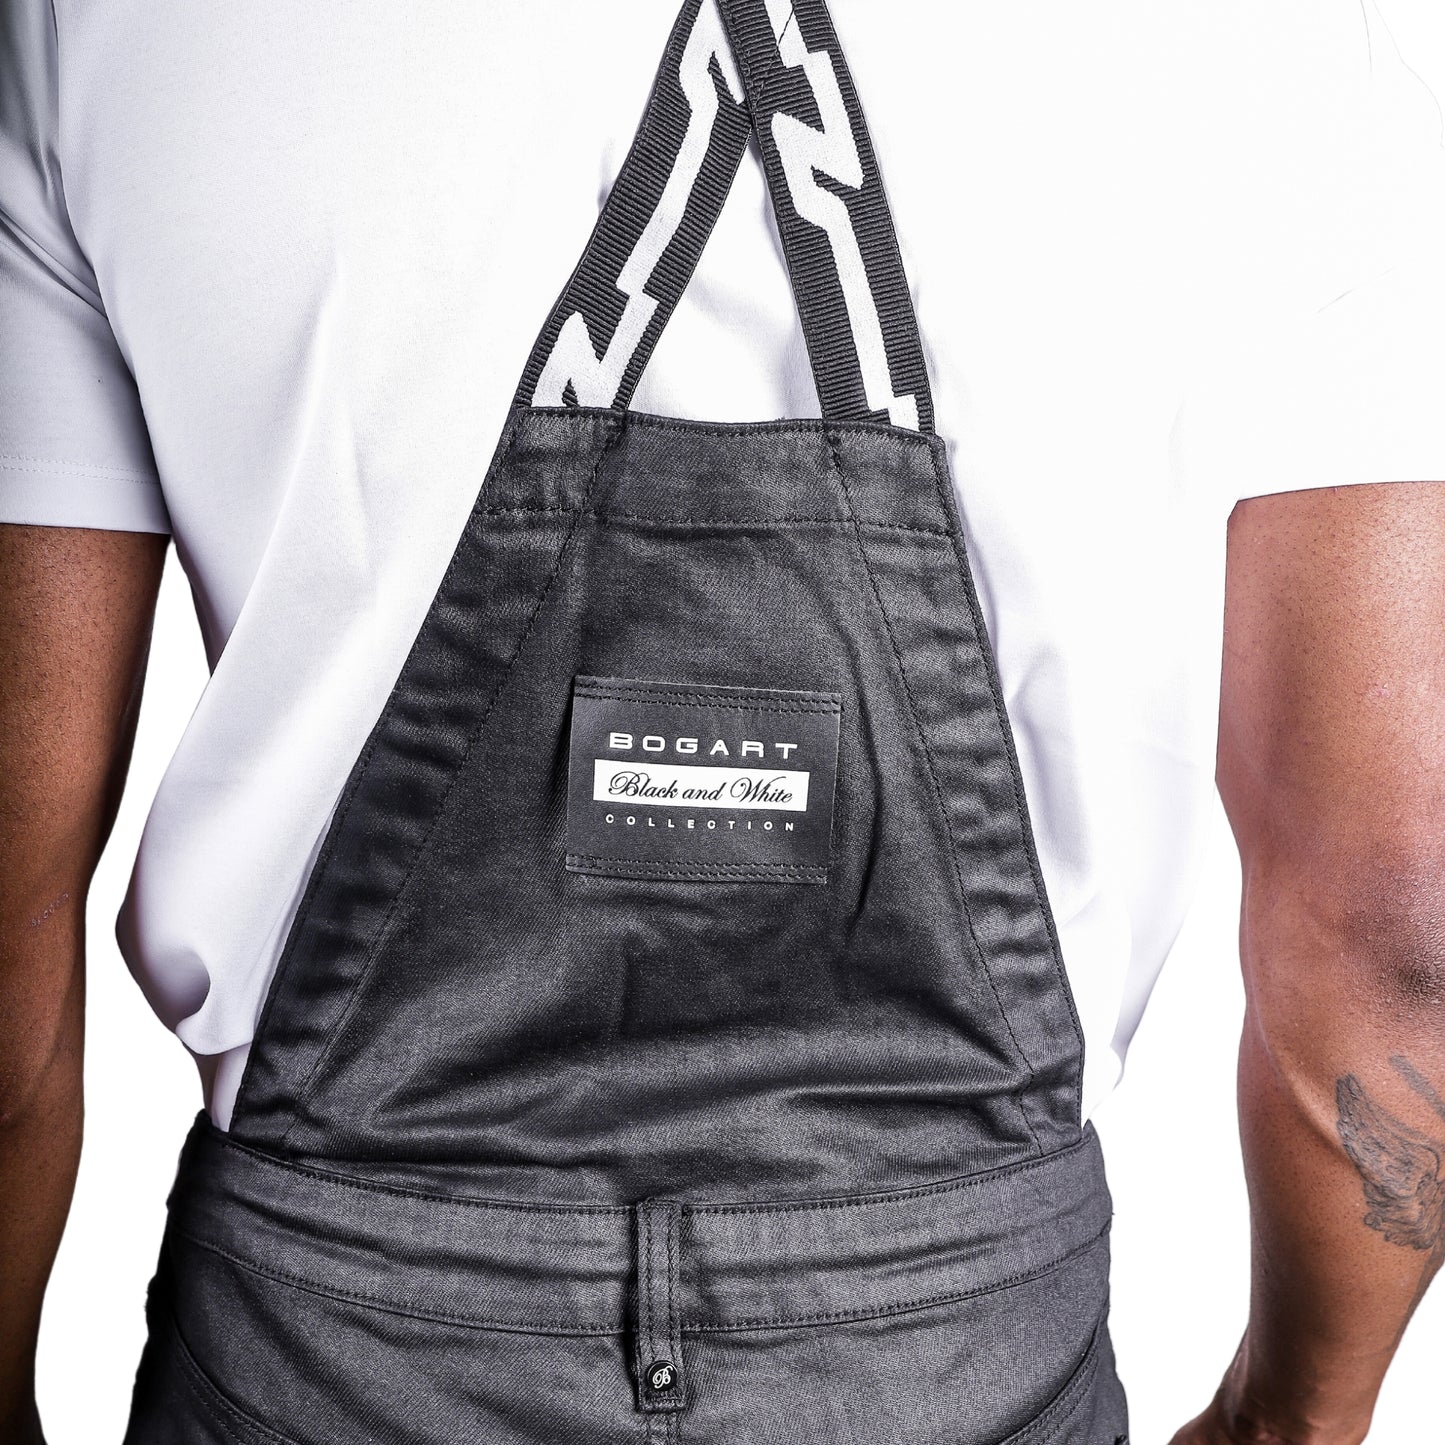 Bogart Man Black and White Collection Dungaree